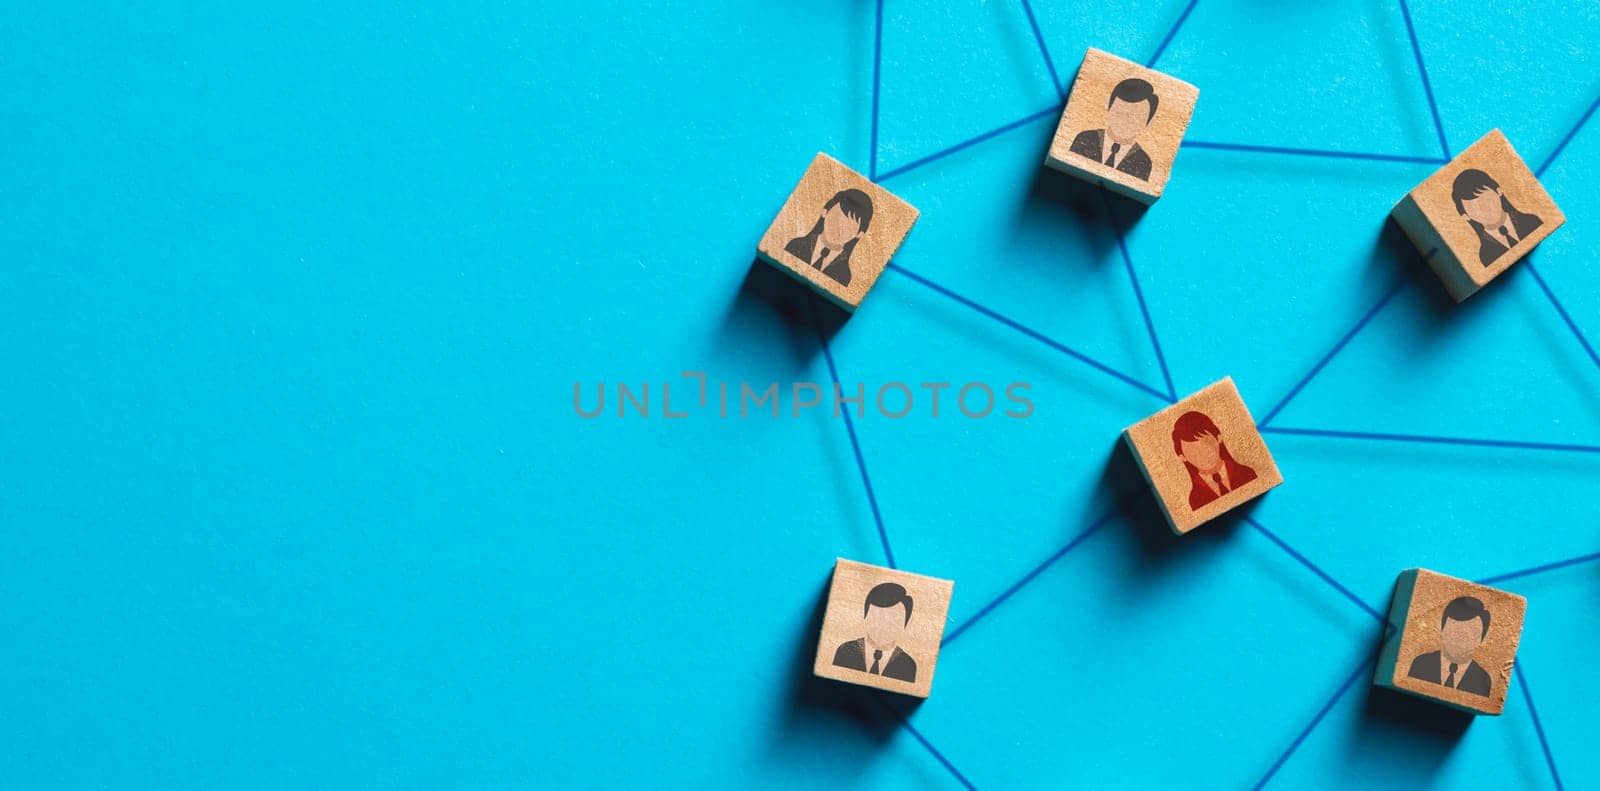 Organization structure, social network and teamwork concept on blue background. Business people icon on wooden cube blocks connecting network of connections by Sonat